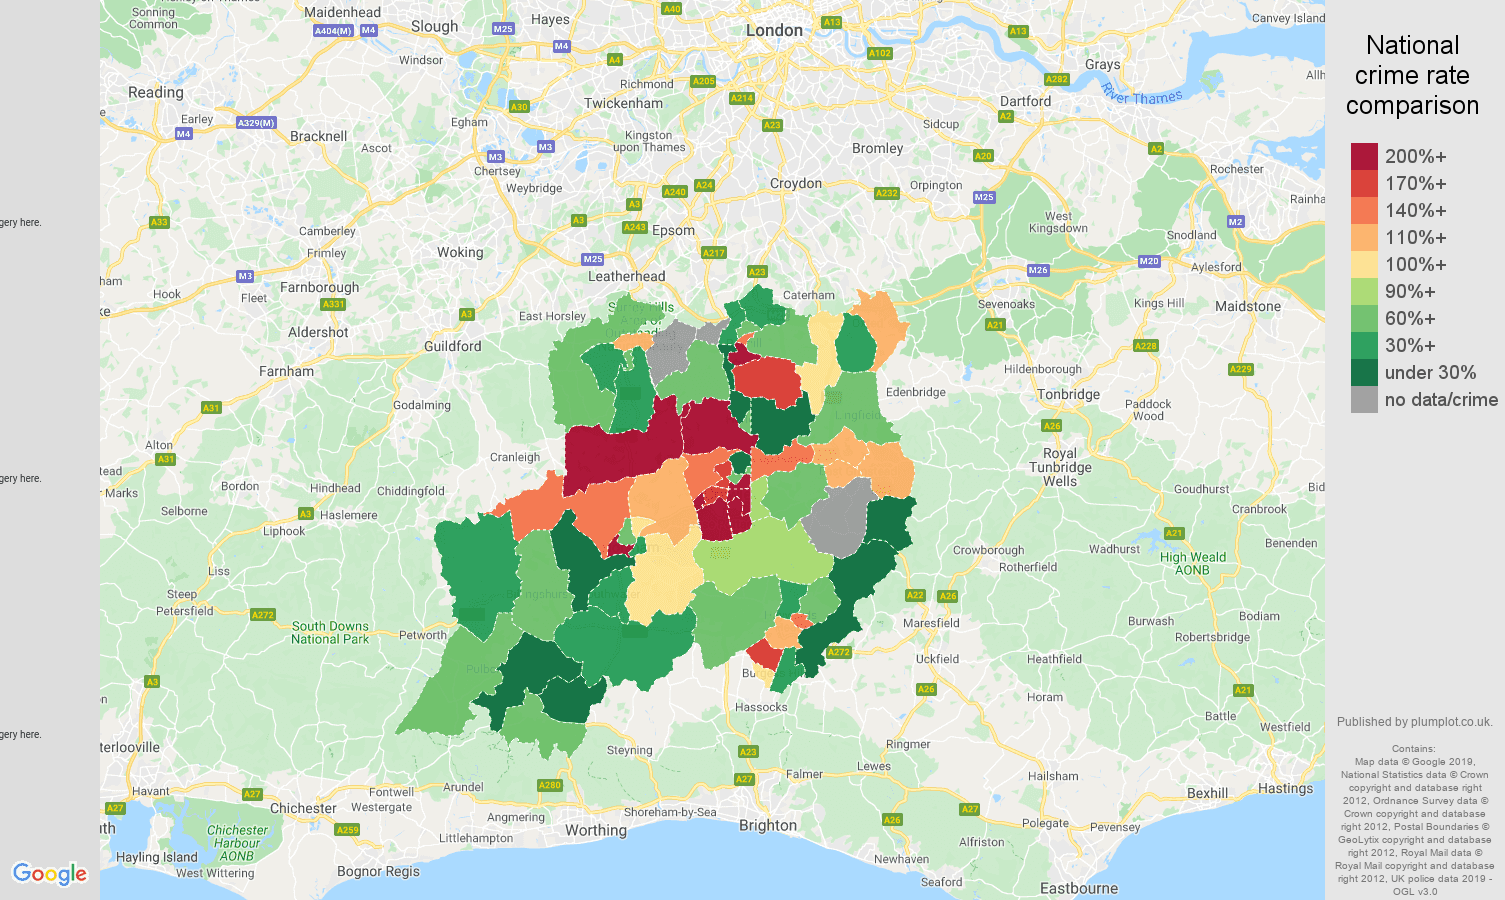 Redhill possession of weapons crime rate comparison map